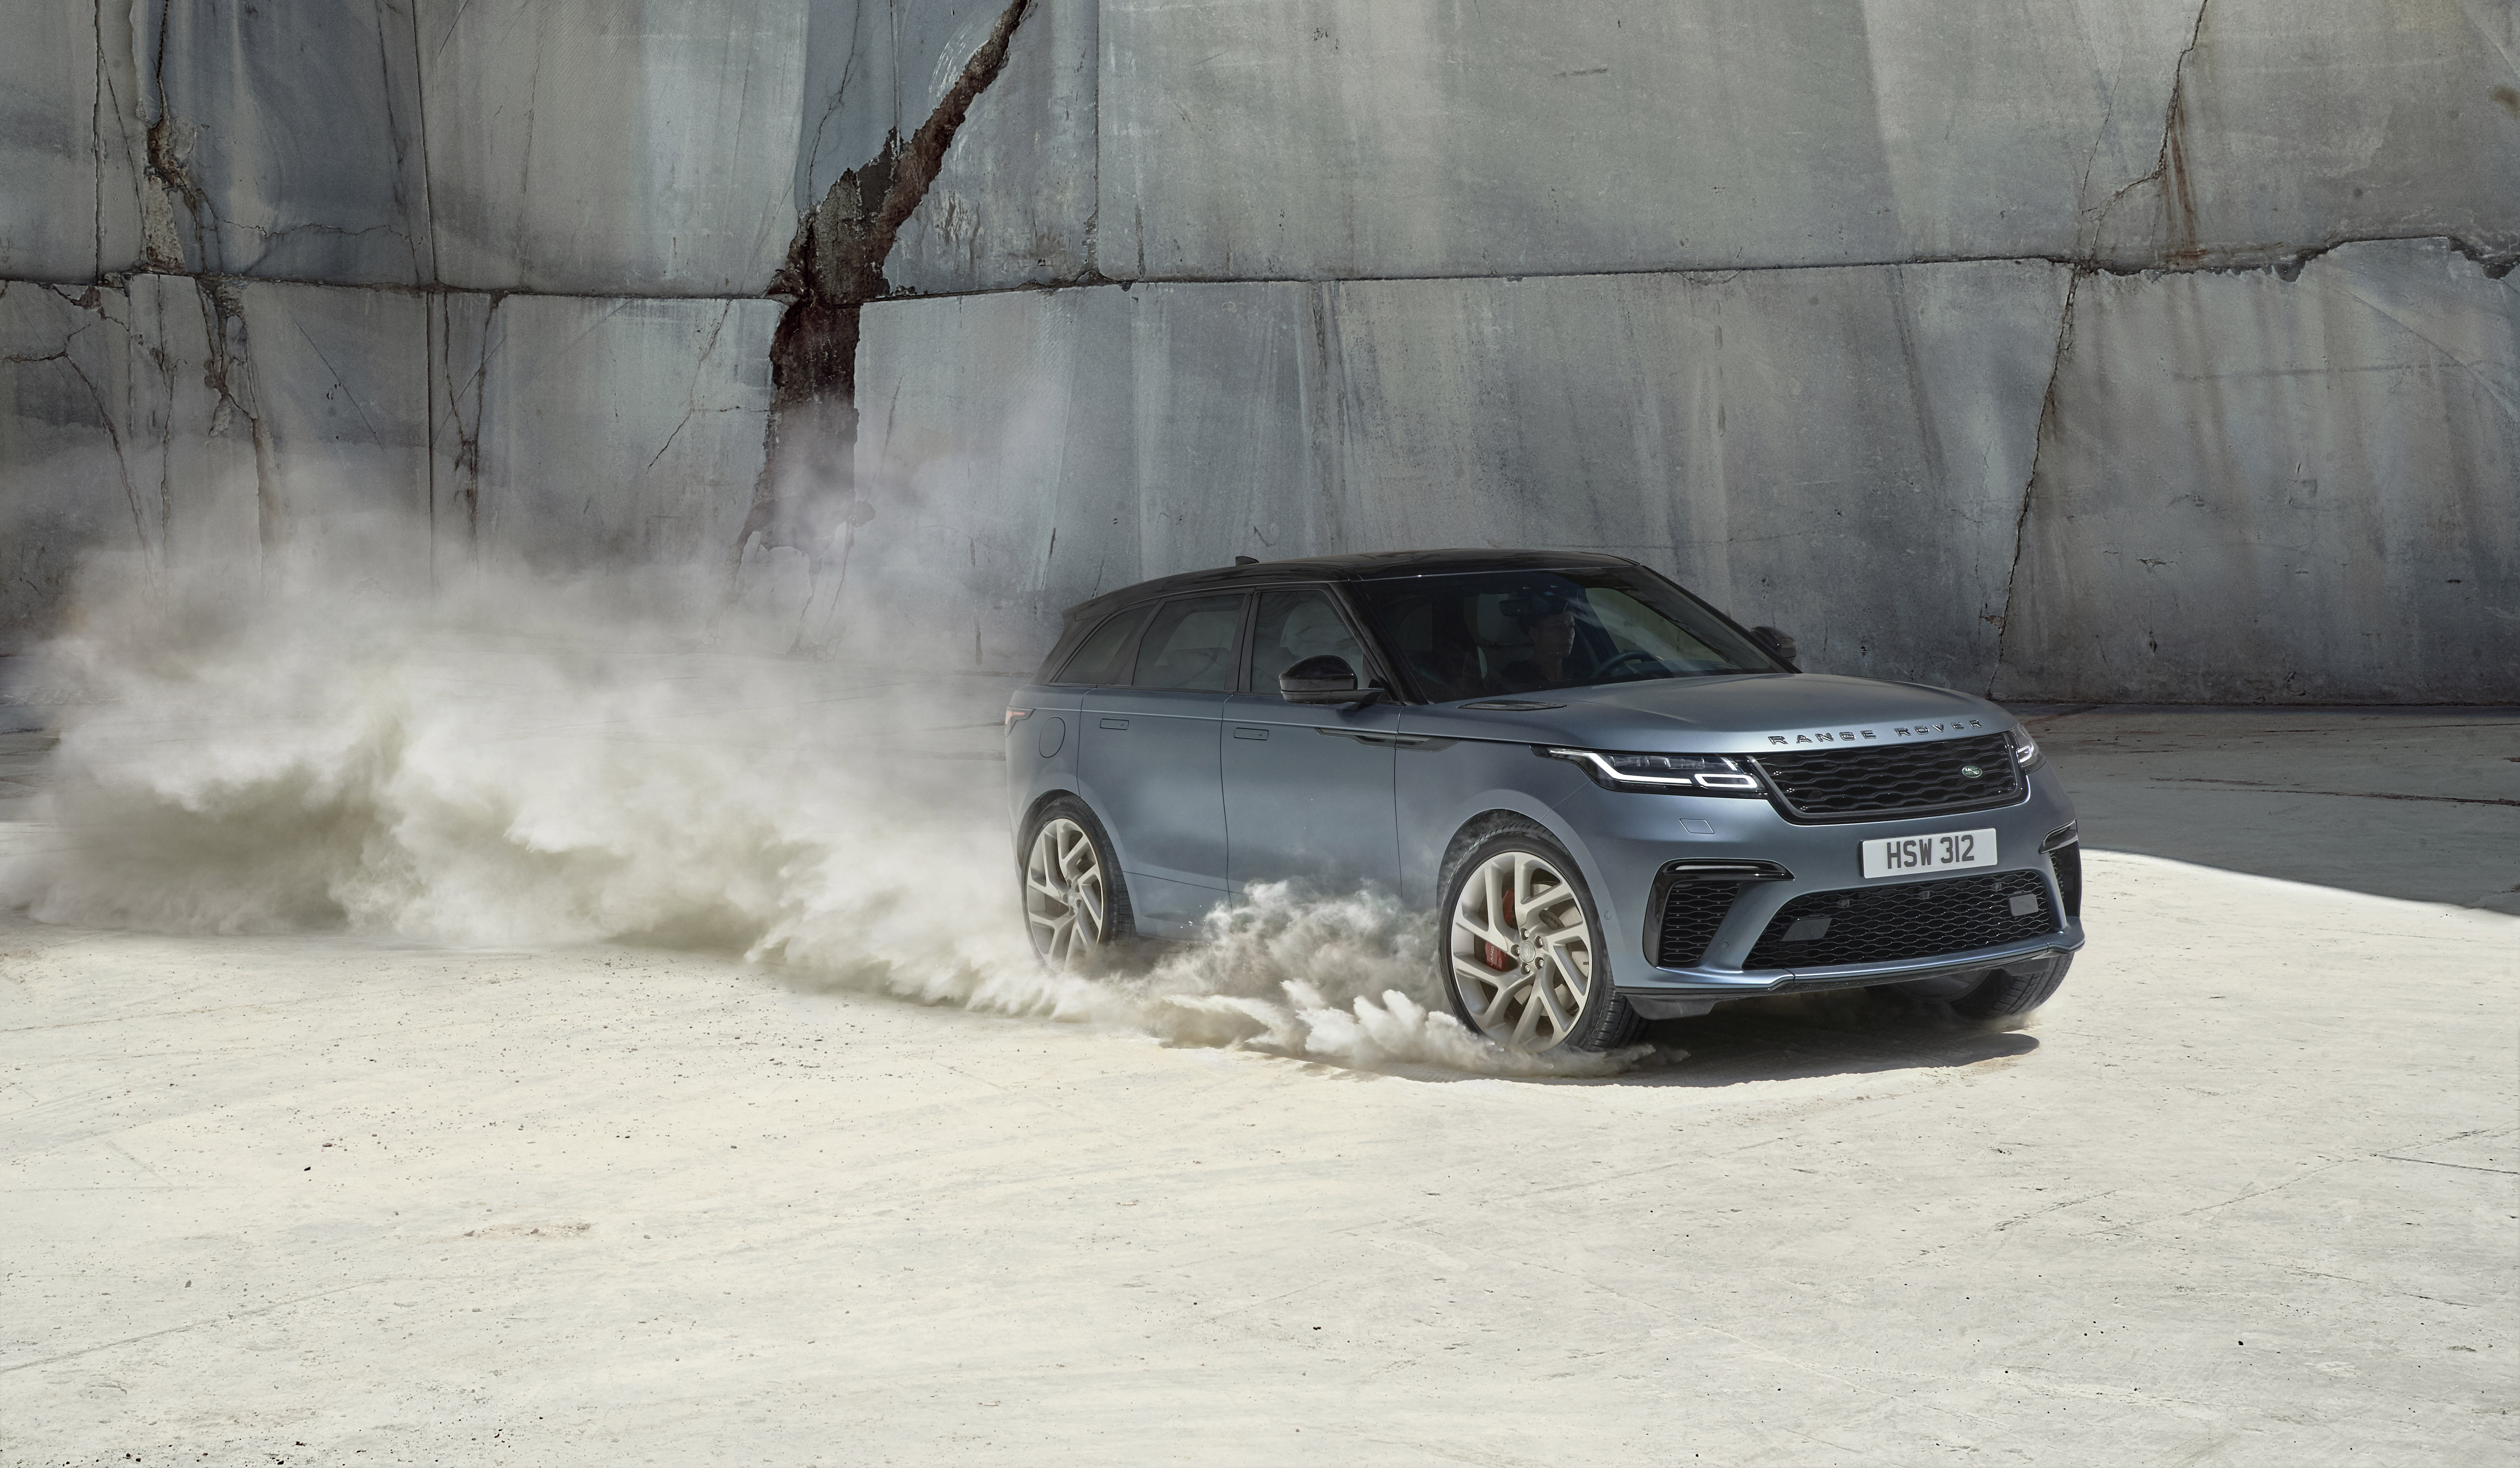 2019 Land Rover Range Rover Velar Svautobiography Hd Cars 4k Wallpapers Images Backgrounds Photos And Pictures